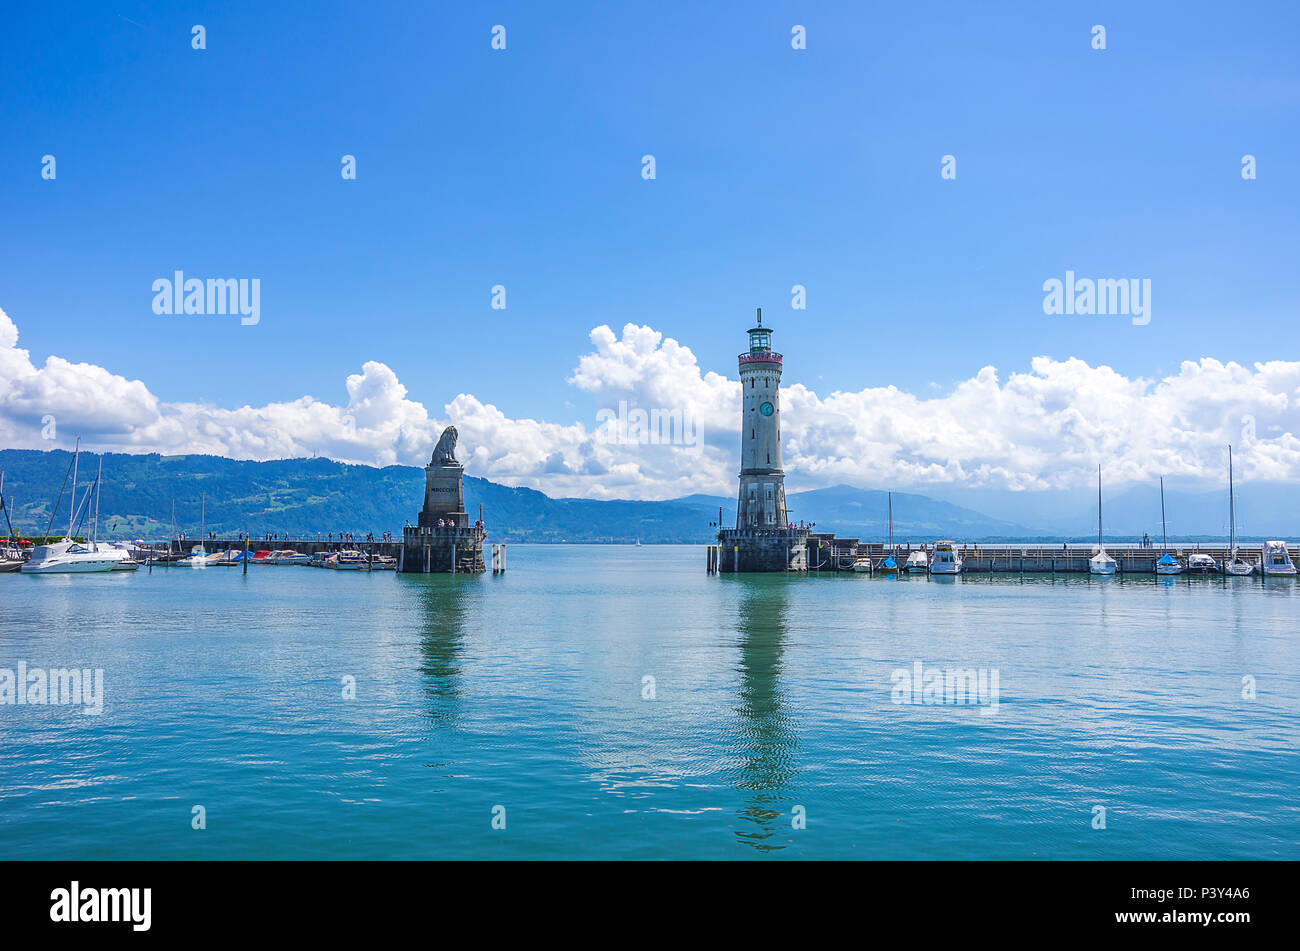 Lindau am Bodensee, Bavaria, Germany - View of the harbor entrance with the Bavarian Lion and lighthouse. Stock Photo